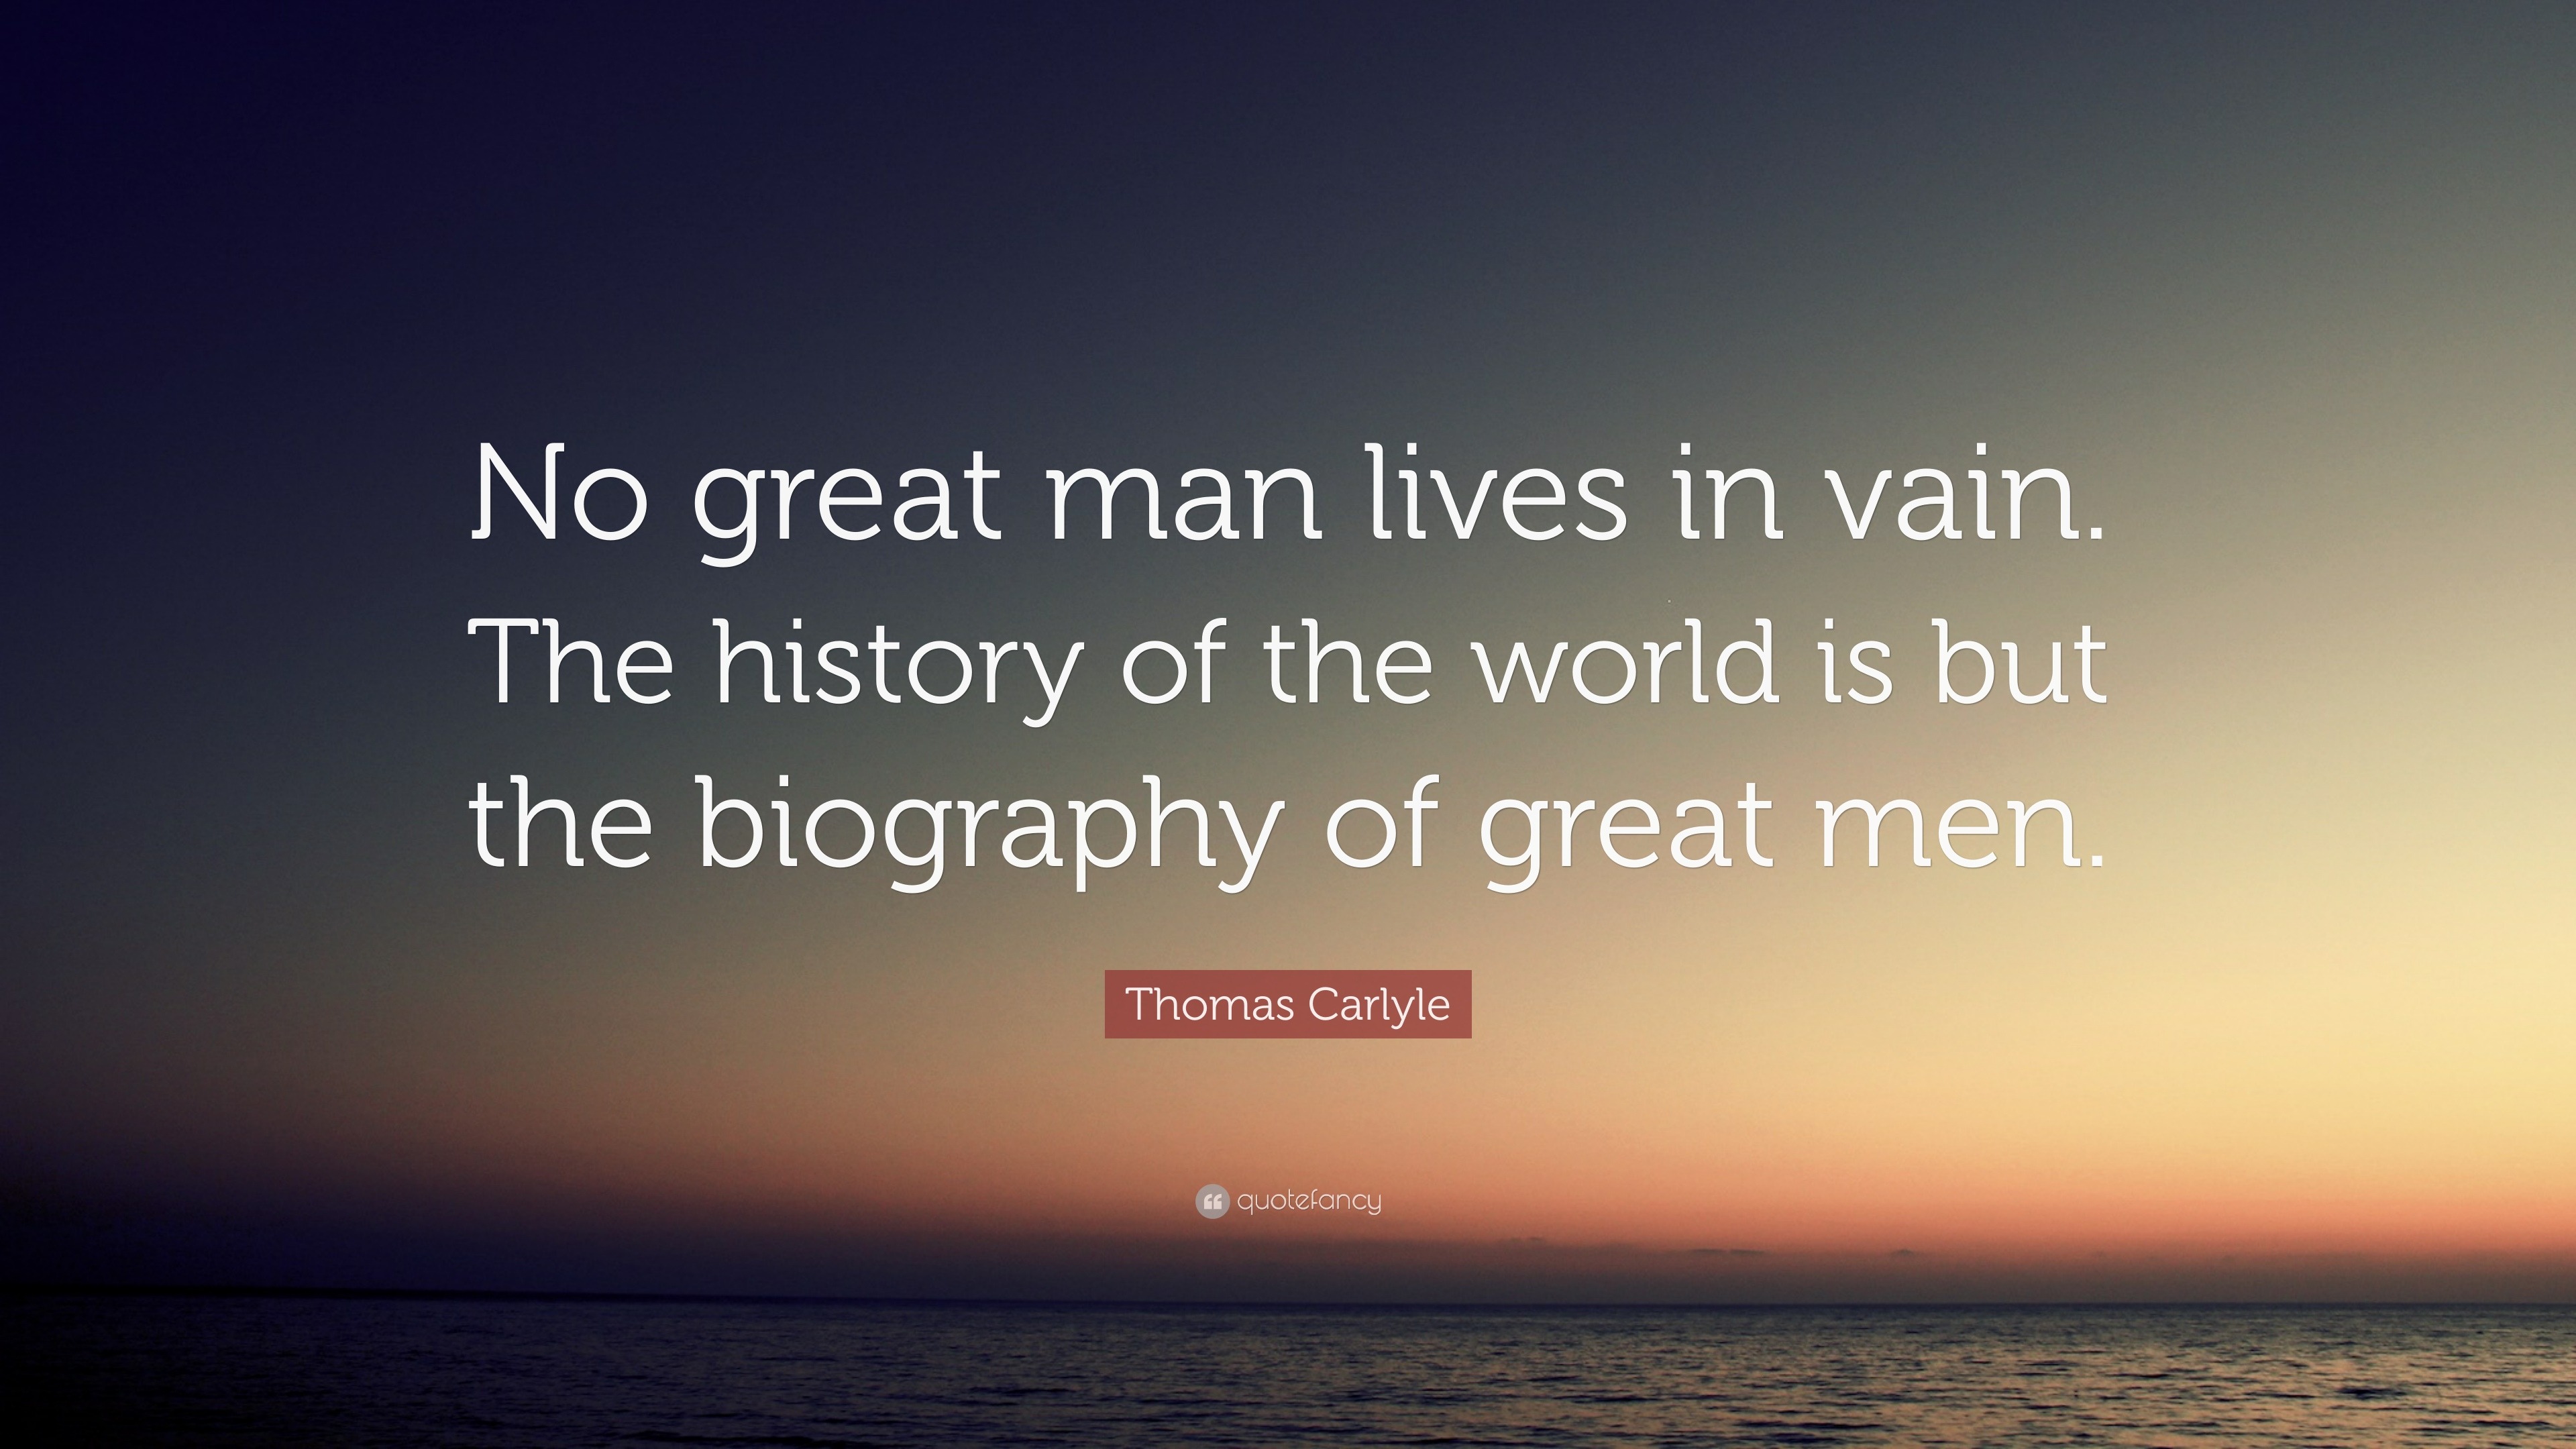 Thomas Carlyle Quote: “No great man lives in vain. The history of the